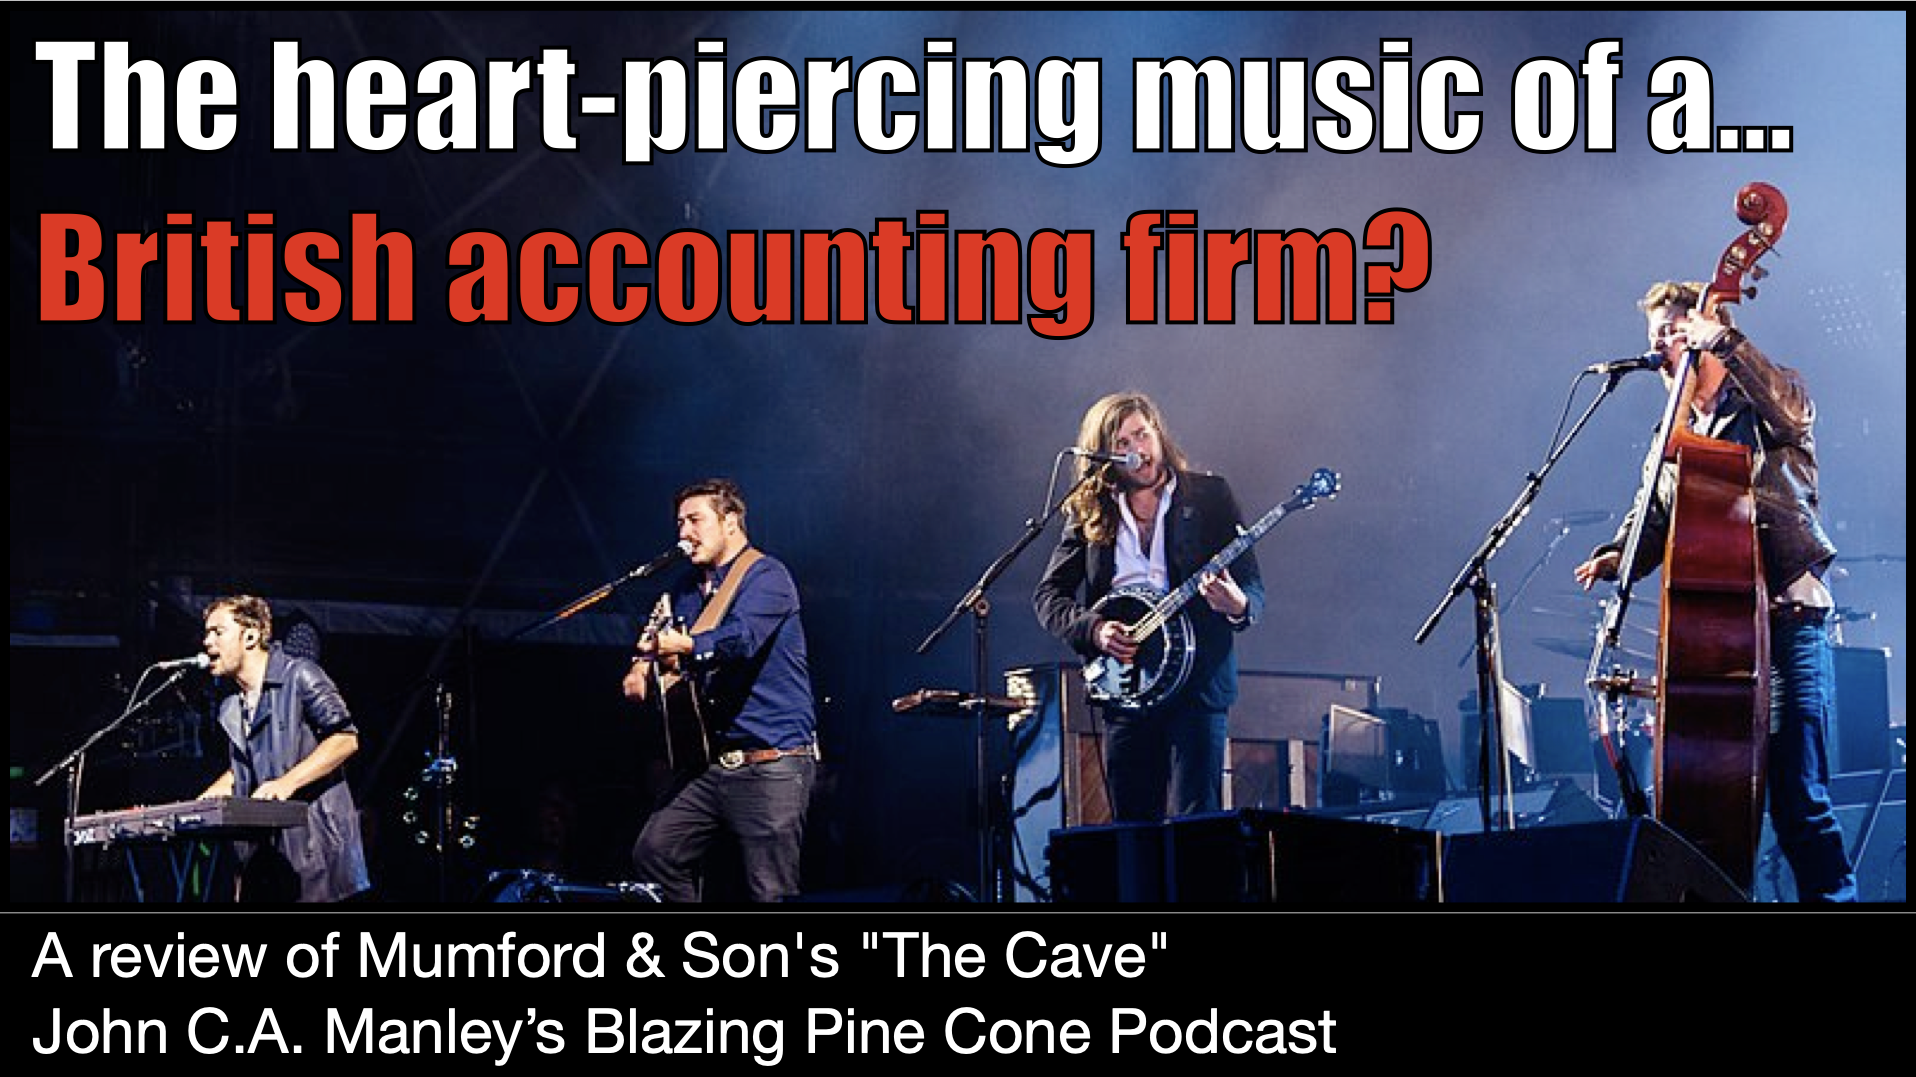 

The heart-piercing music of a... British accounting firm?

